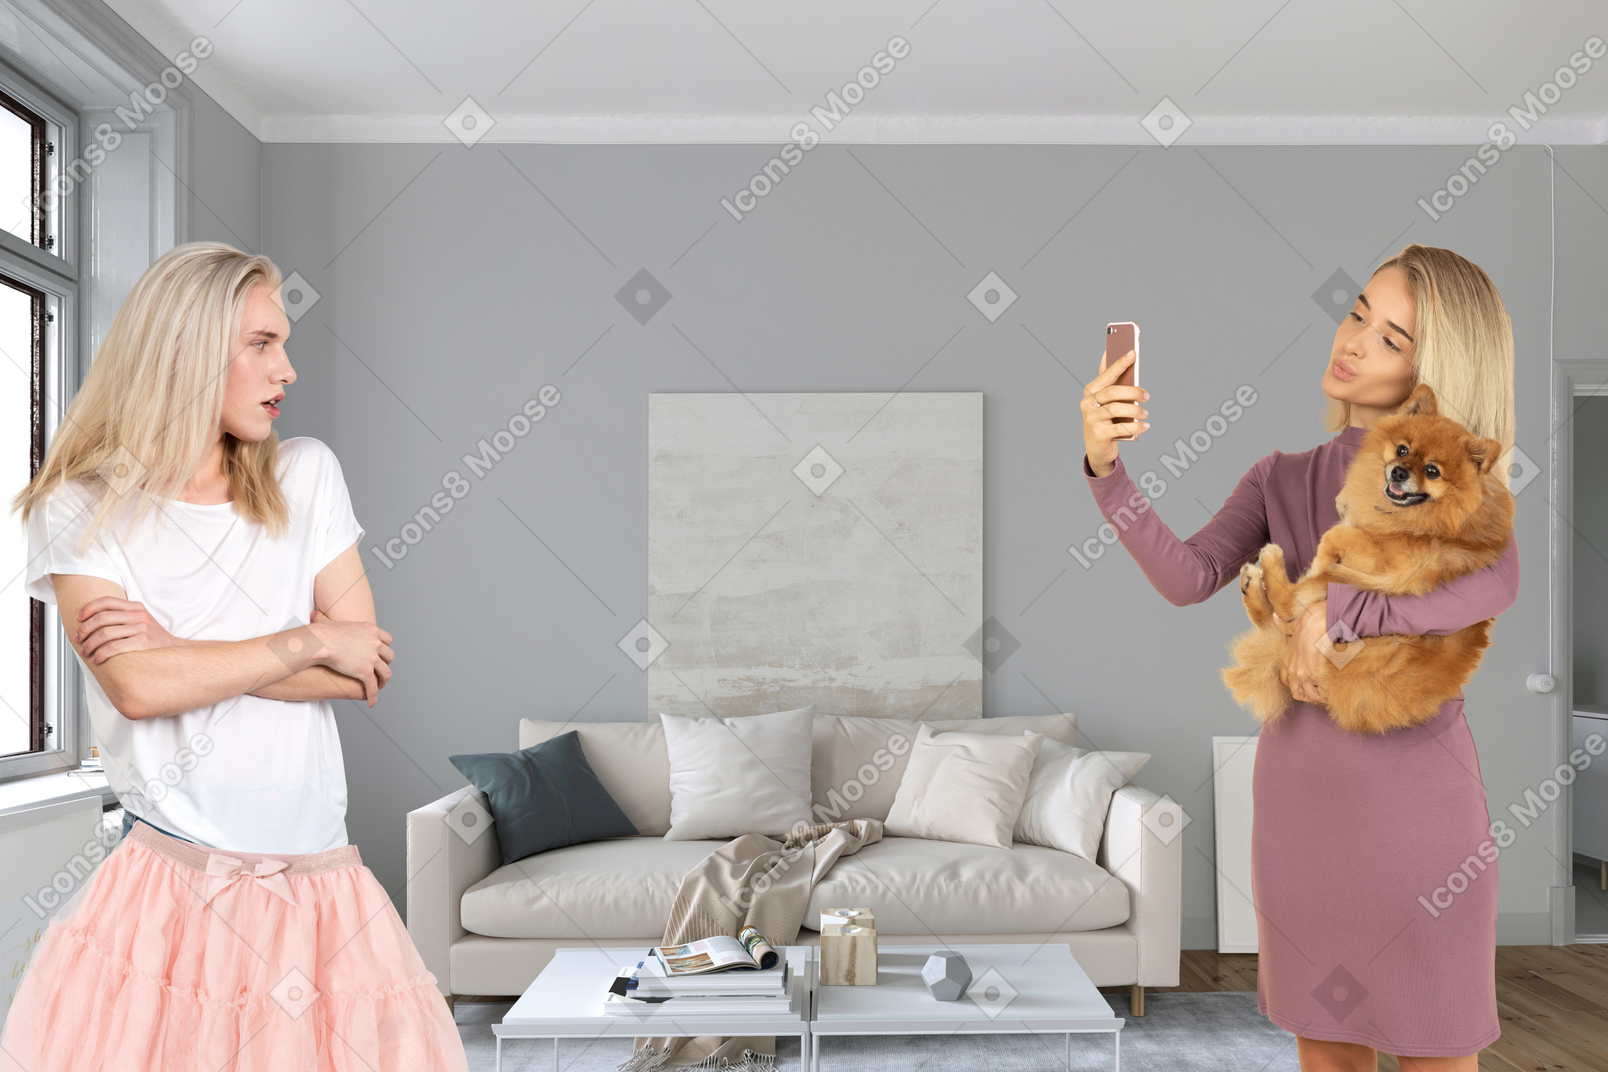 A woman holding a teddy bear in her bedroom